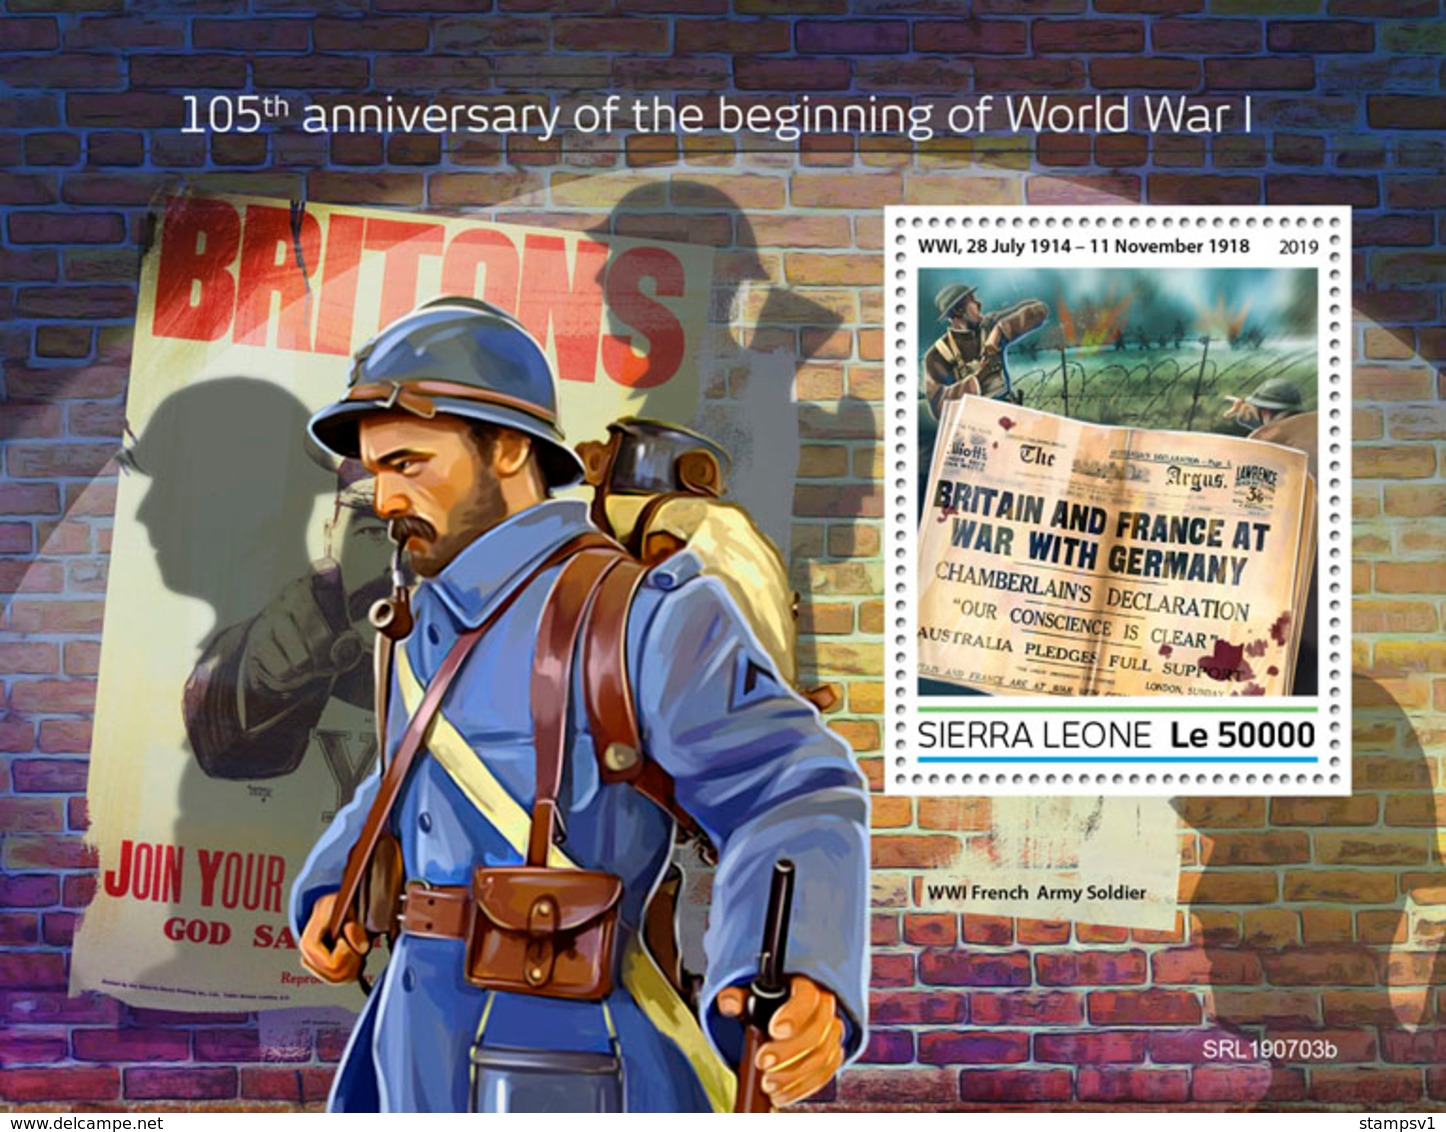 Sierra Leone. 2019 105th Anniversary Of The Beginning Of World War I. (0703b)  OFFICIAL ISSUE - 1. Weltkrieg